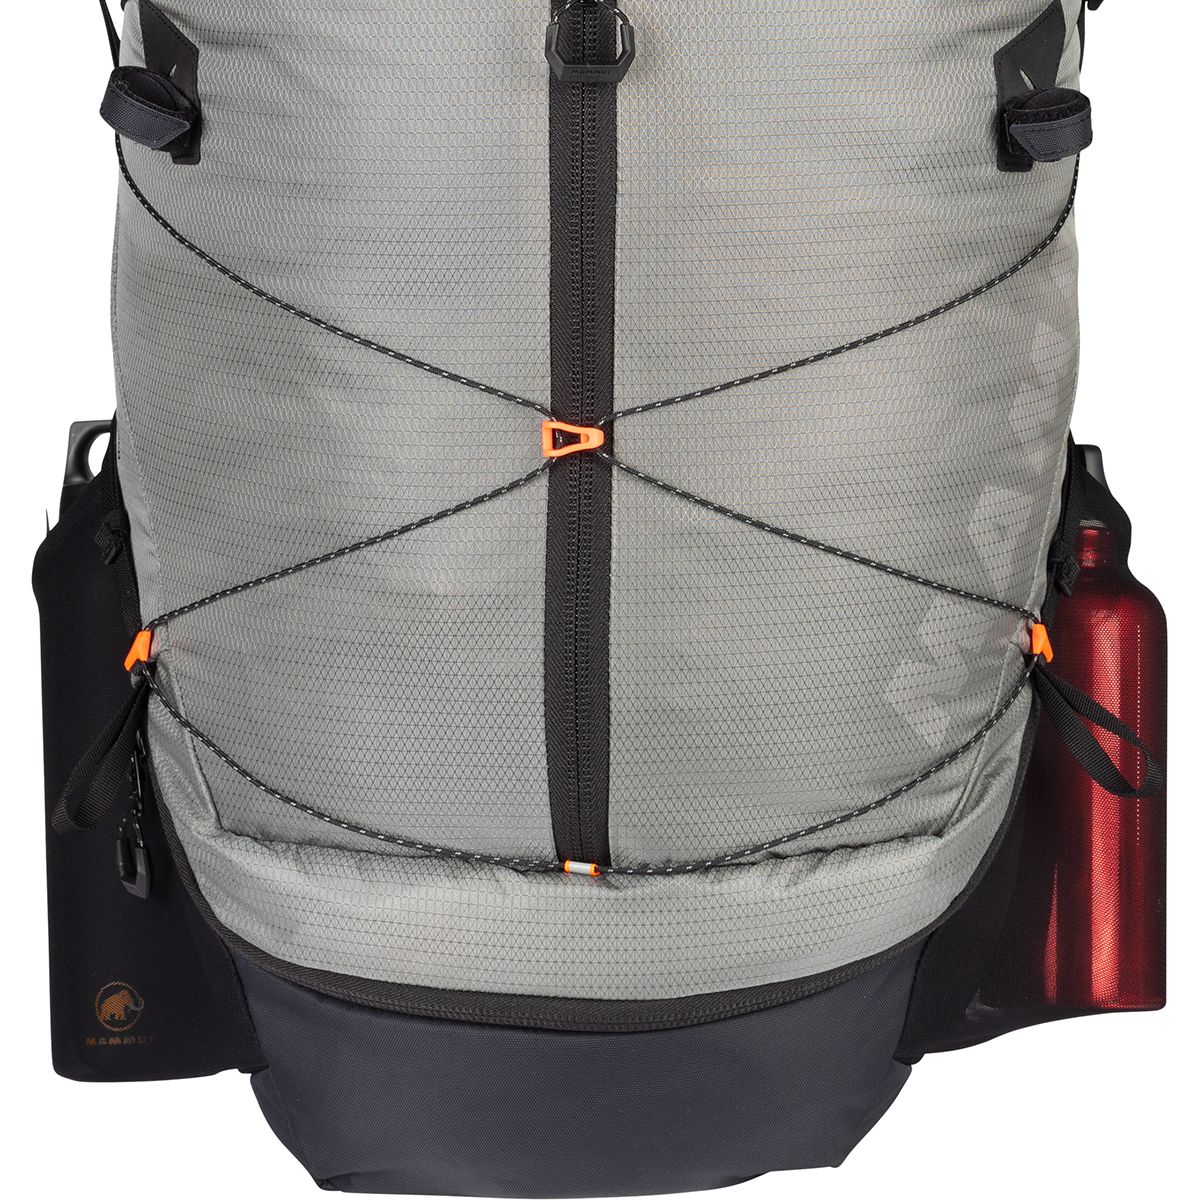 Mammut Ducan Spine 50-60L Backpack - Women's - Hike & Camp